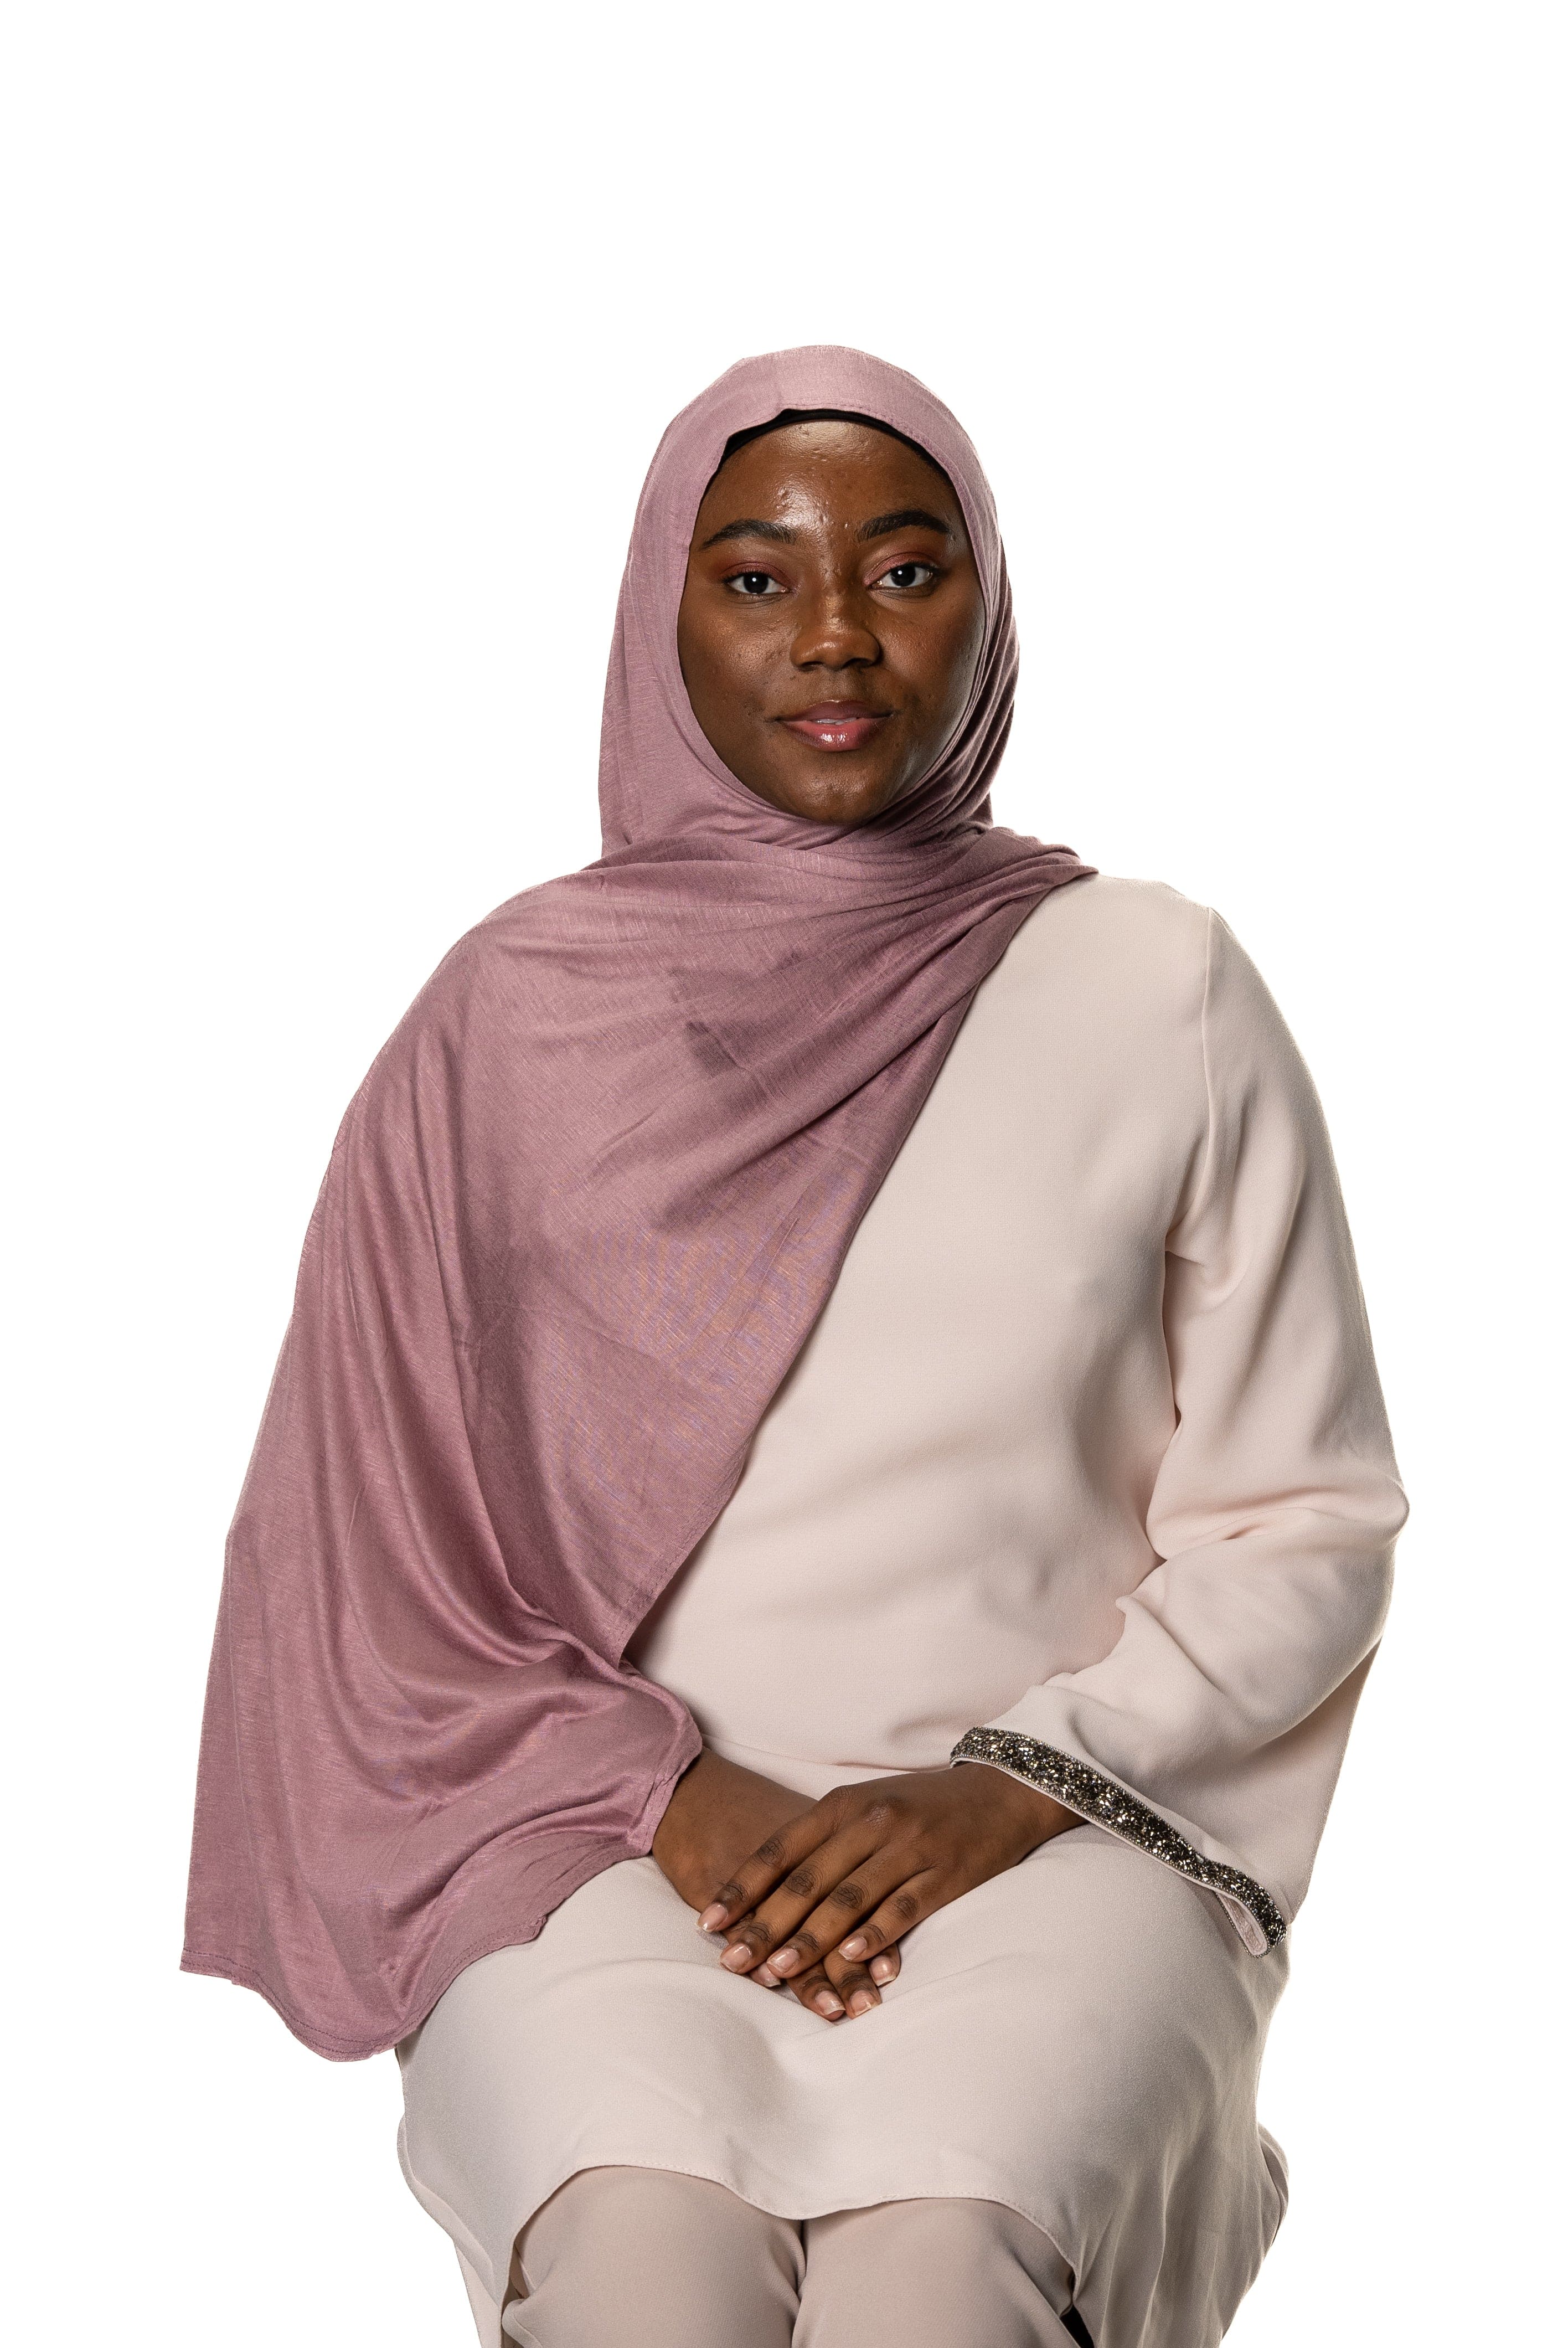 Jolie Nisa Hijab Dusty Rose Premium Slip-on Jersey Instant Head Scarf Wrap for Effortless and Stylish Hijab Wear Premium Slip-on instant Jersey Head Scarf Wrap for Effortless and Stylish Hijab Wear!